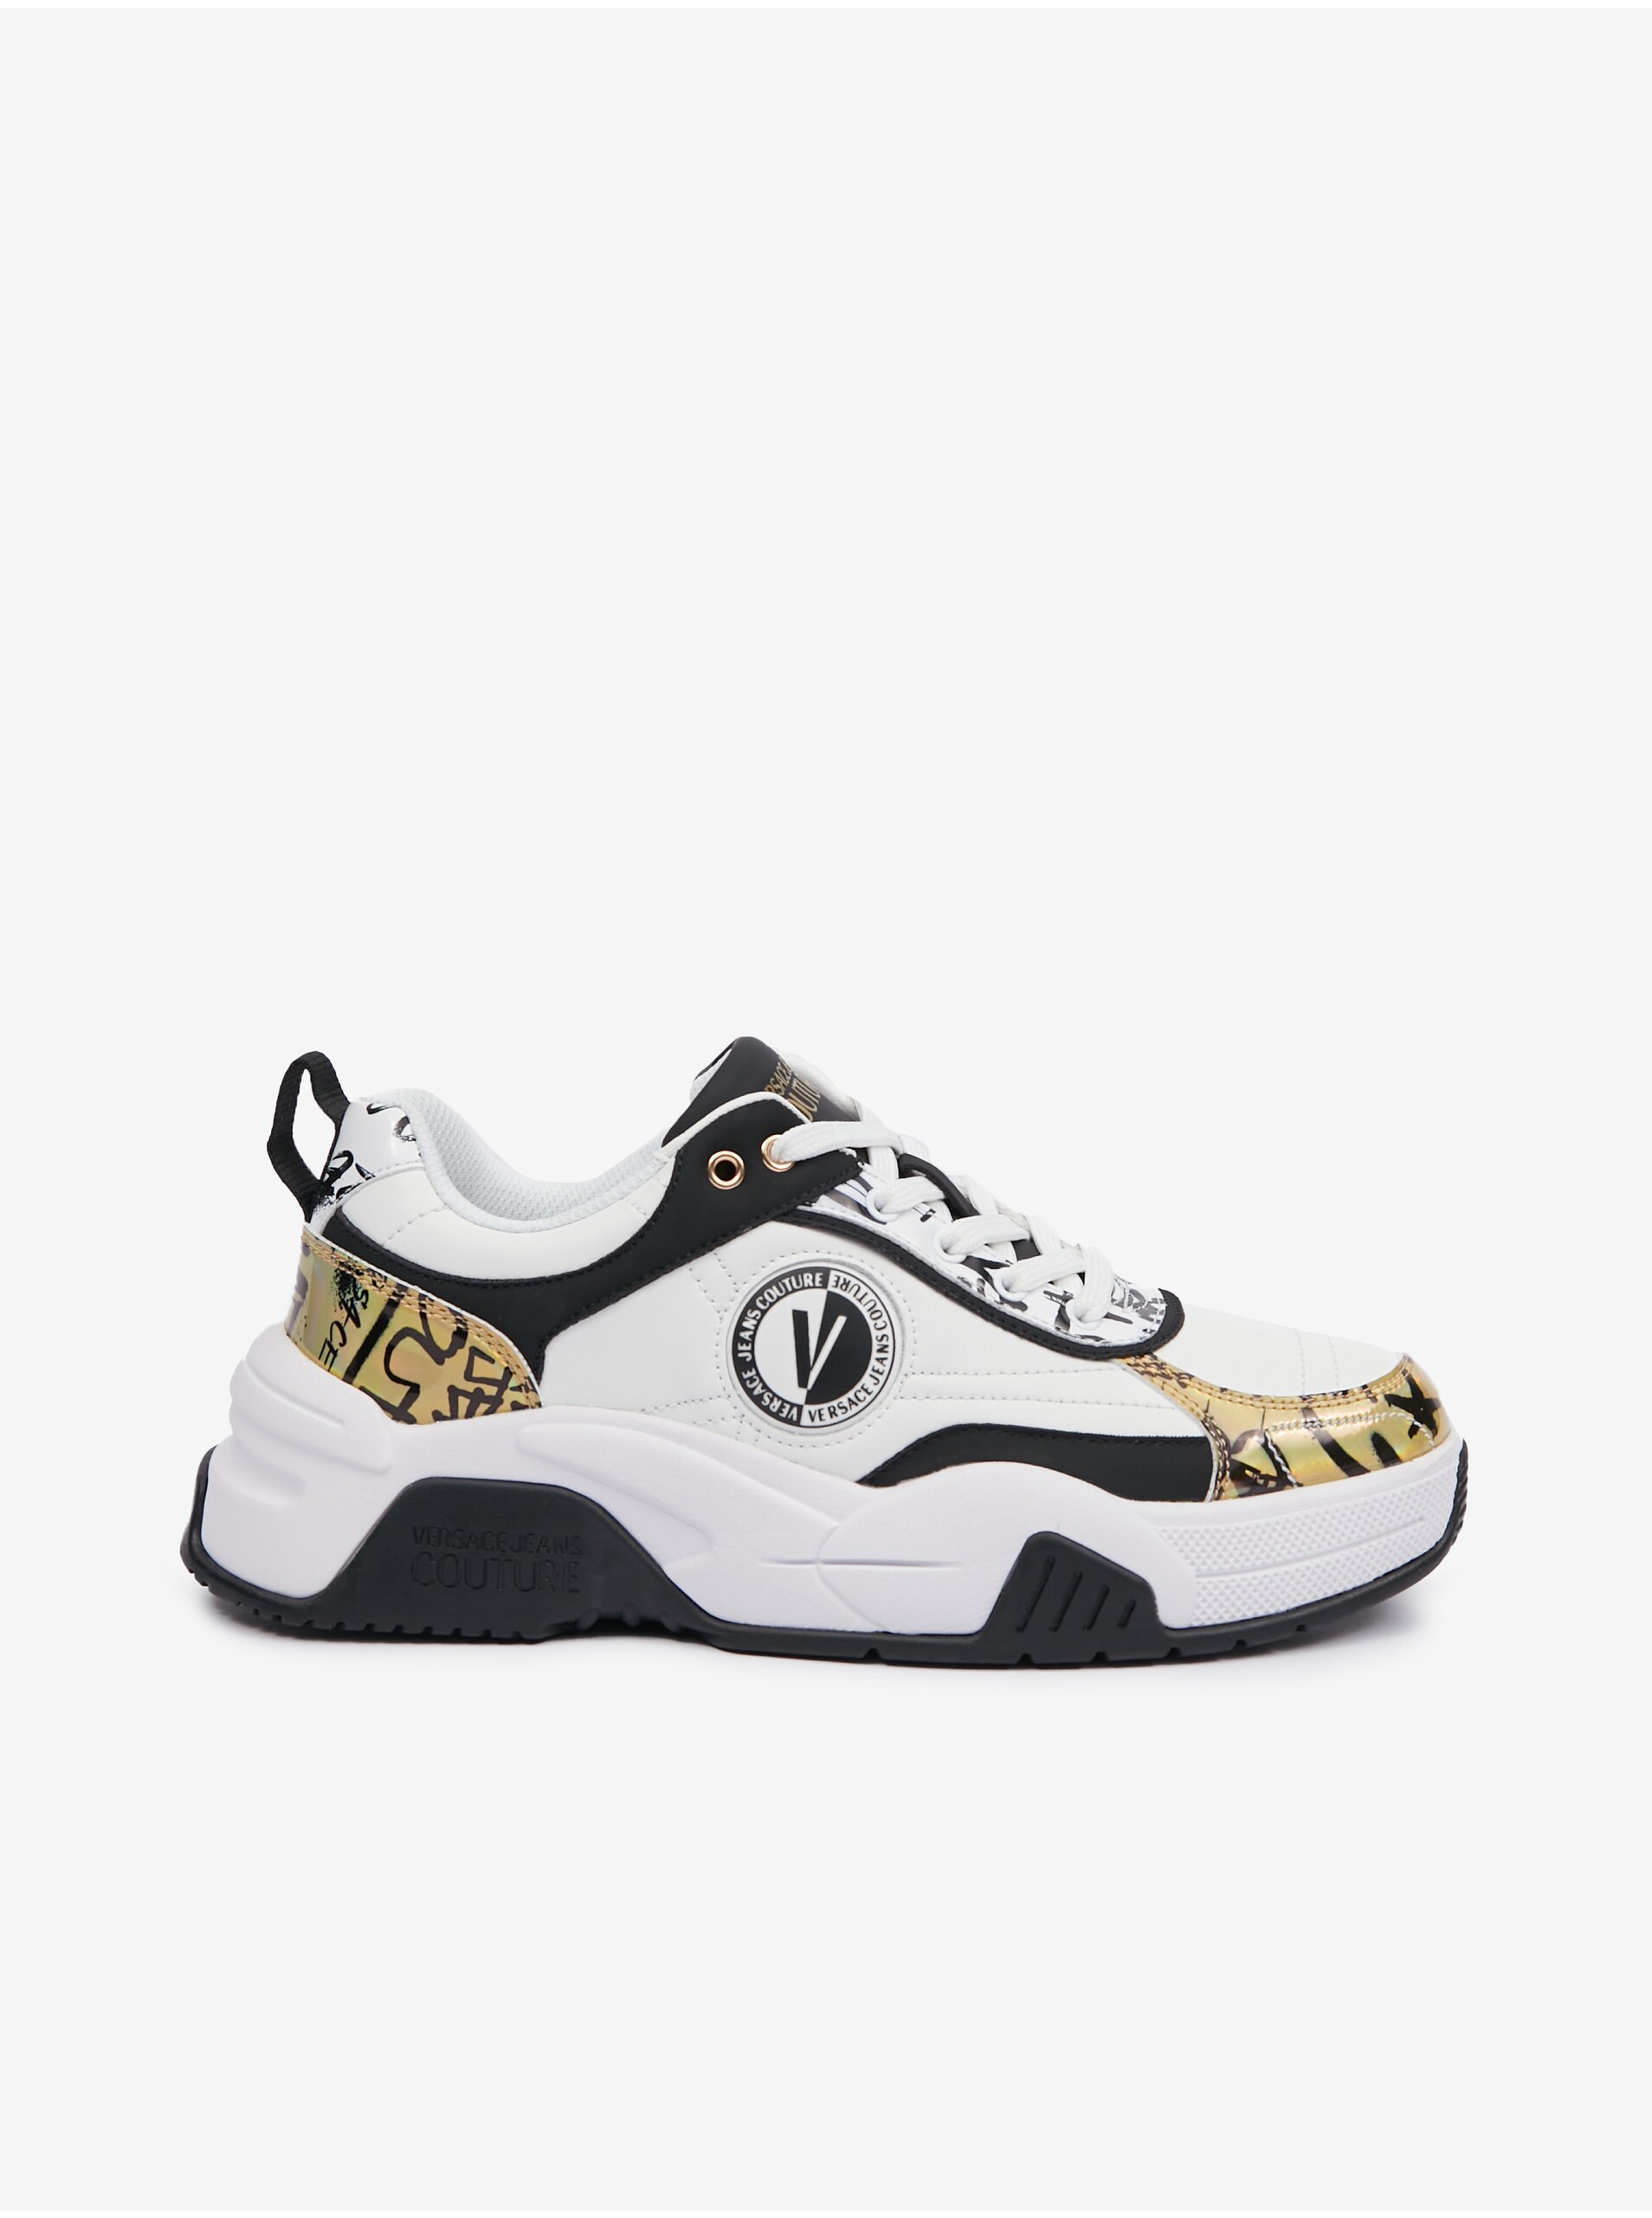 Versace Jeans Couture Black and white men's sneakers with leather details Versace Jeans Coutur - Men's